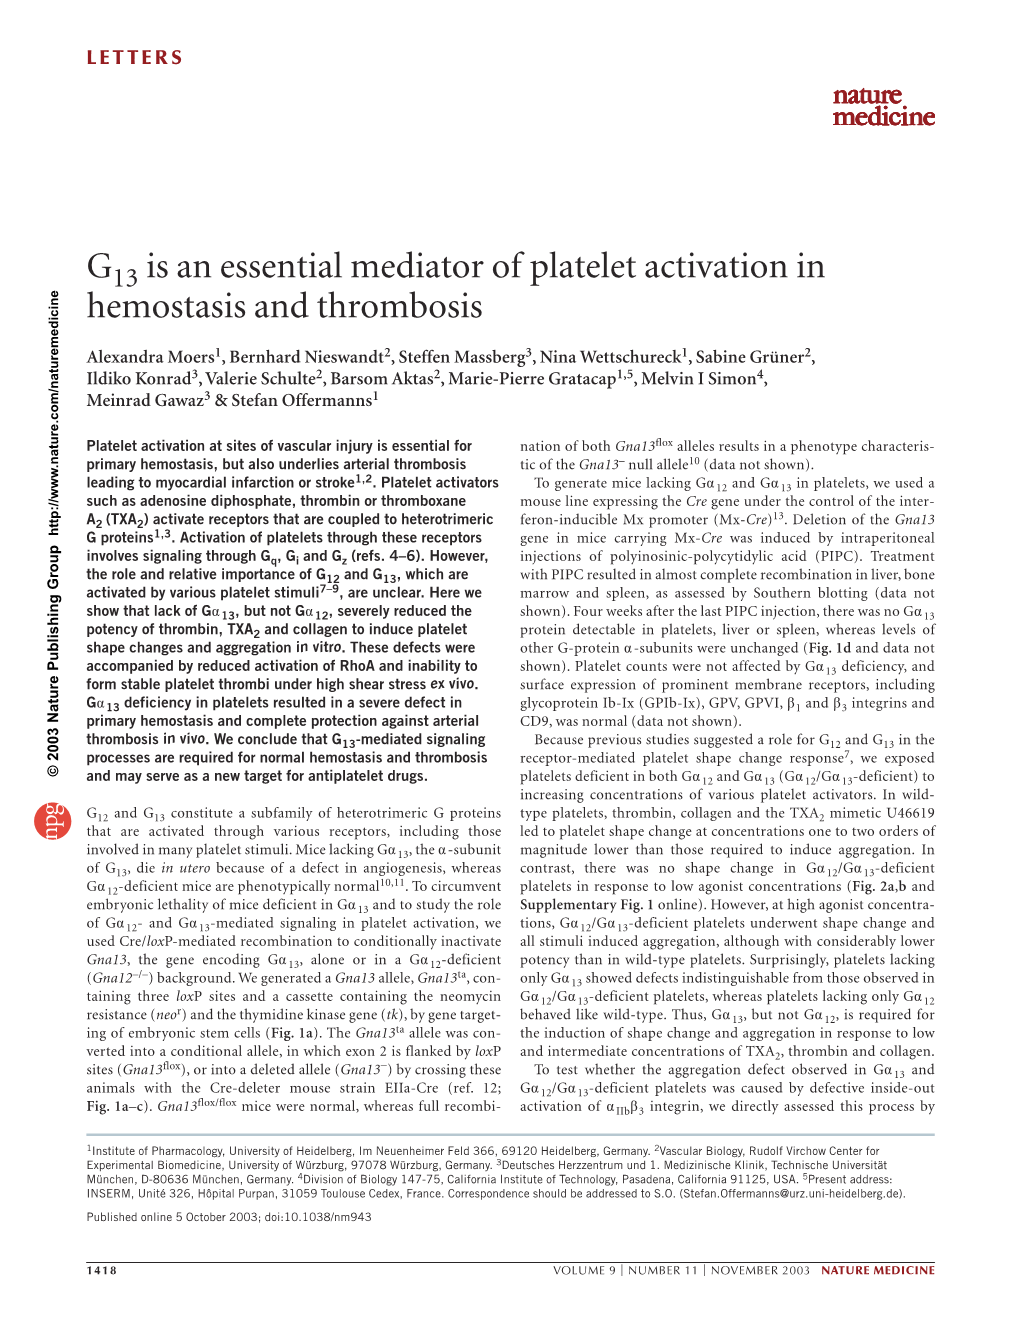 G Is an Essential Mediator of Platelet Activation in Hemostasis And